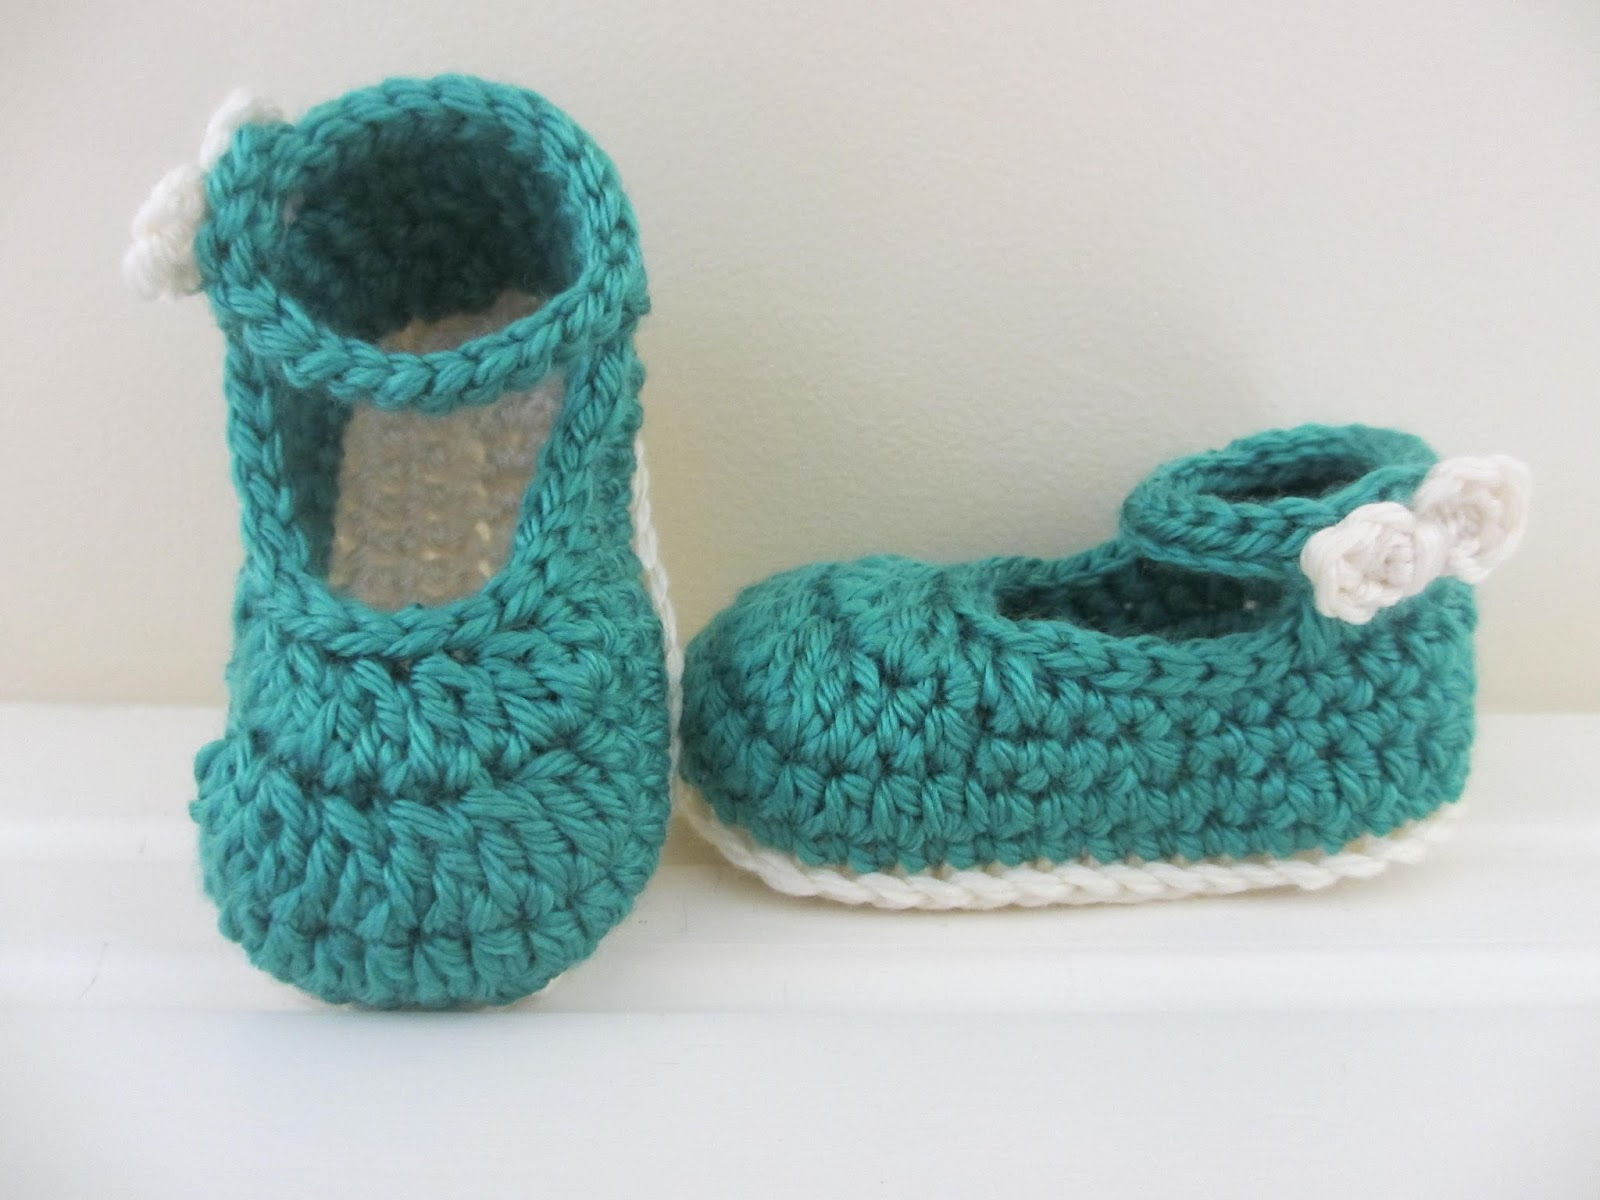 40+ Adorable and FREE Crochet Baby Booties Patterns --> Bow Buckle Mary Janes